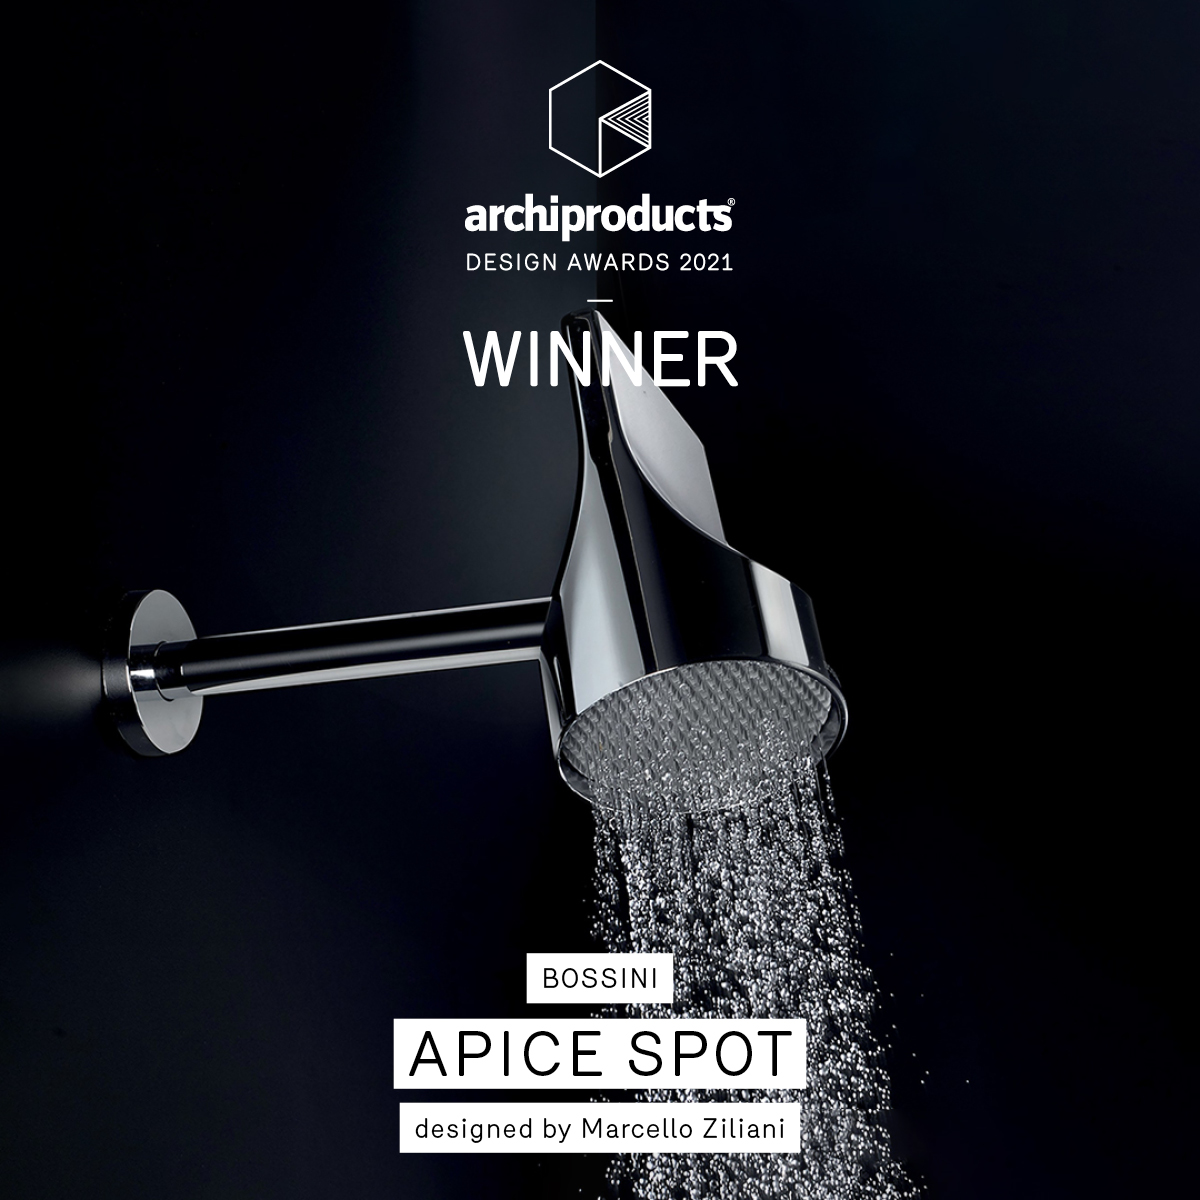 Archiproducts DESIGN AWARDS 2021